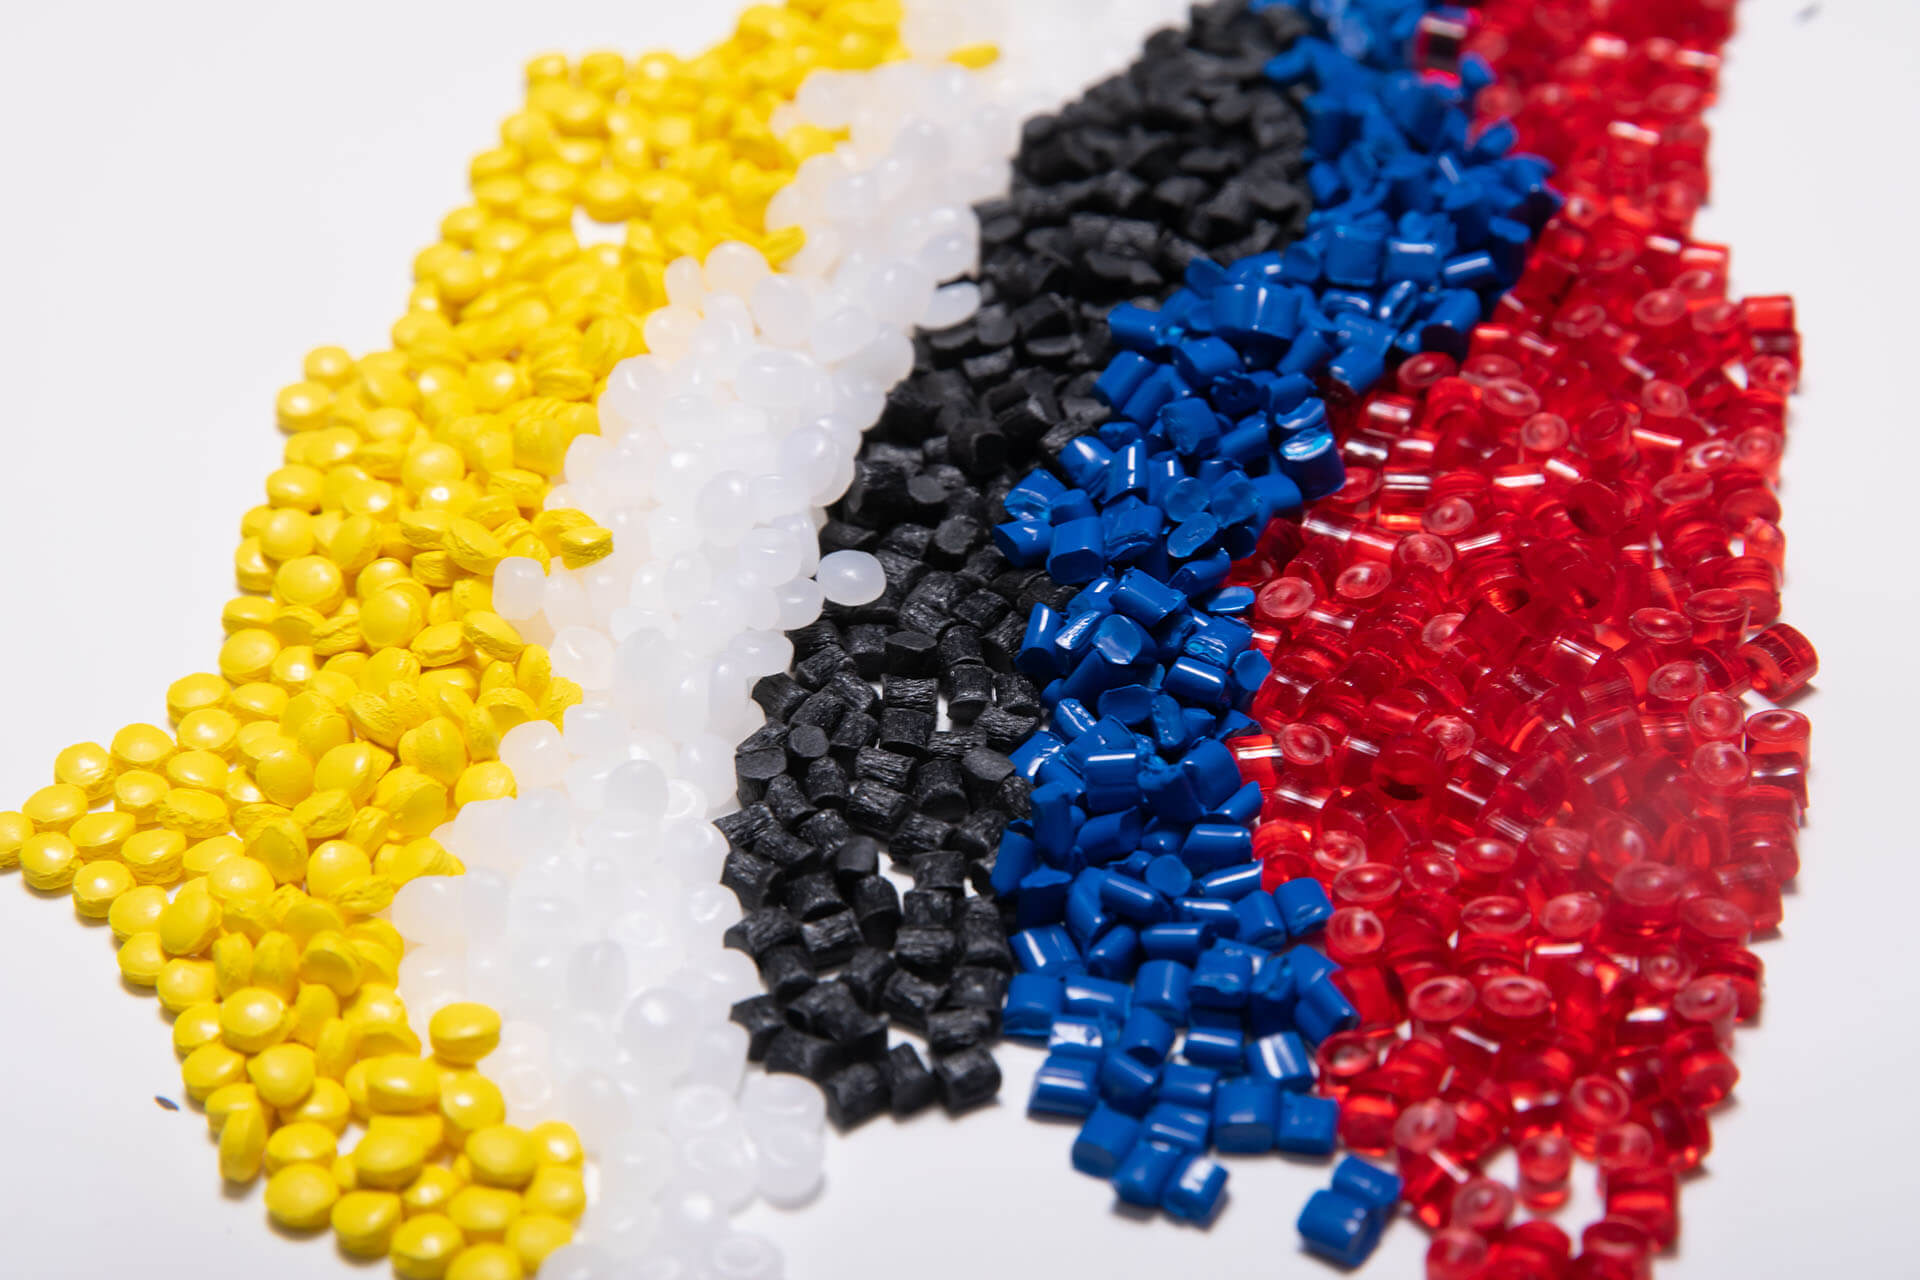 pile of injection molding resin pellets that are yellow white black blue red